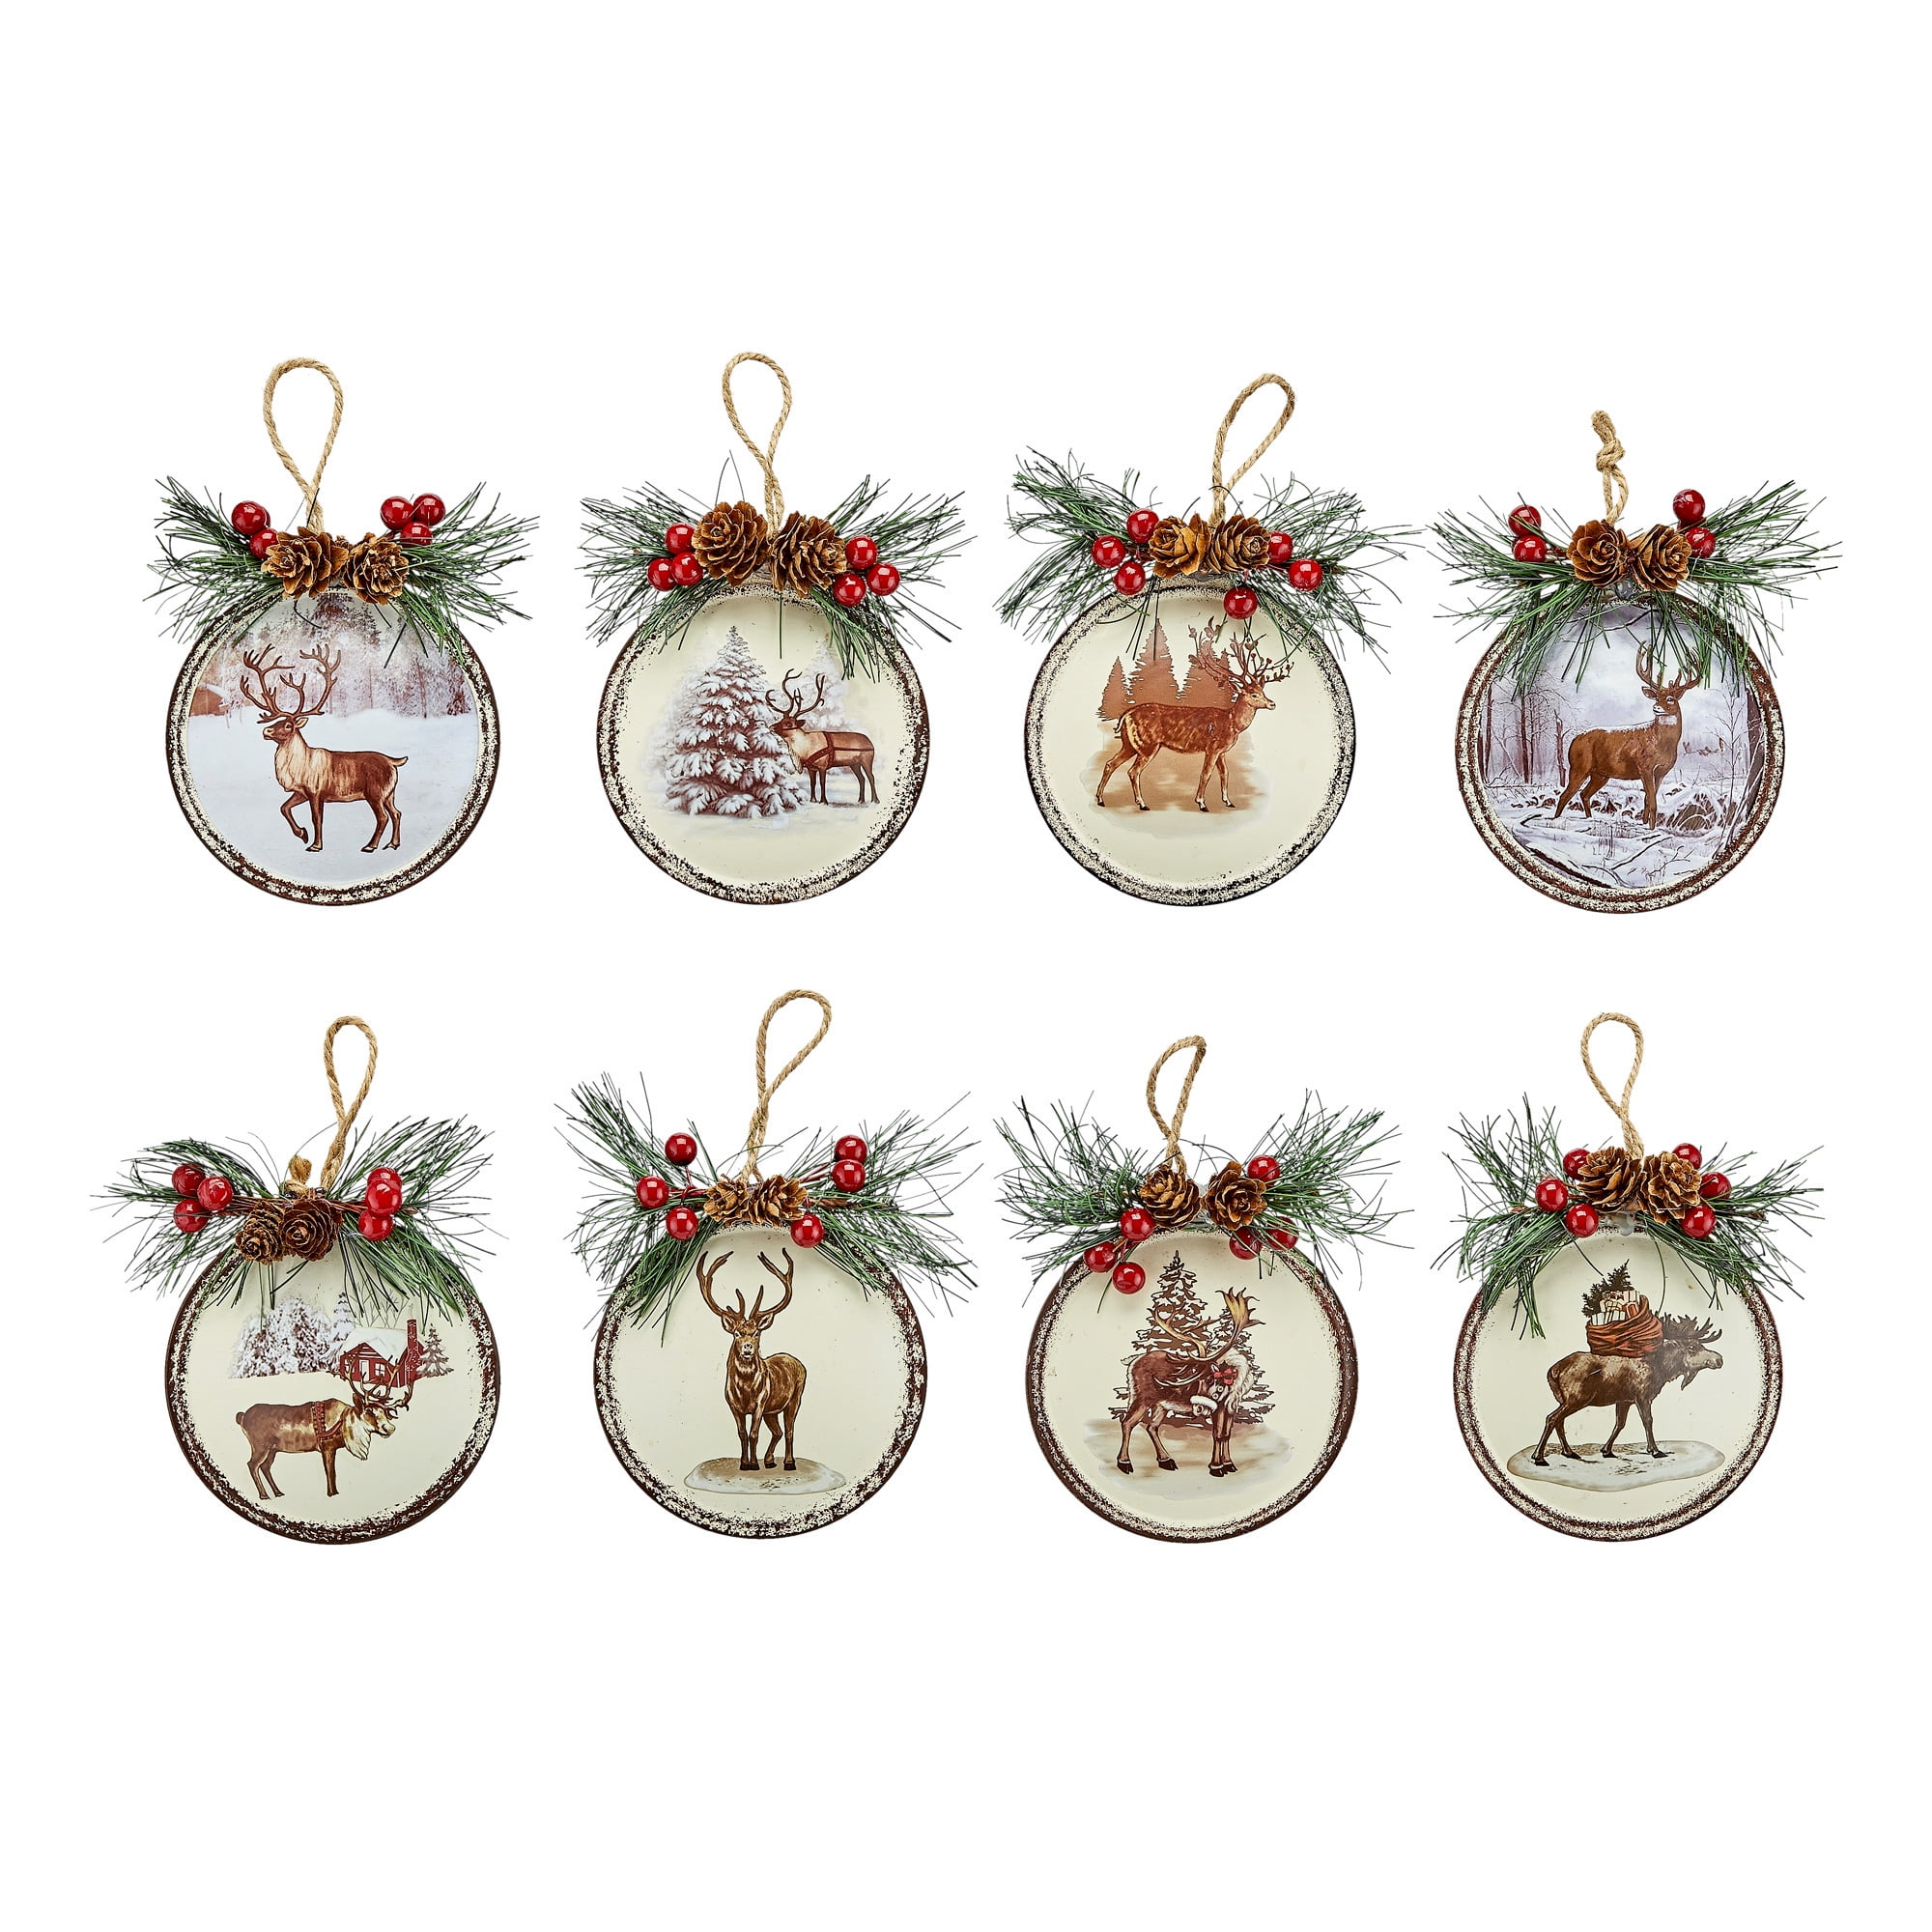 Hanging Stockings 2 3 4 5 People Personalized Christmas Ornament Kit 